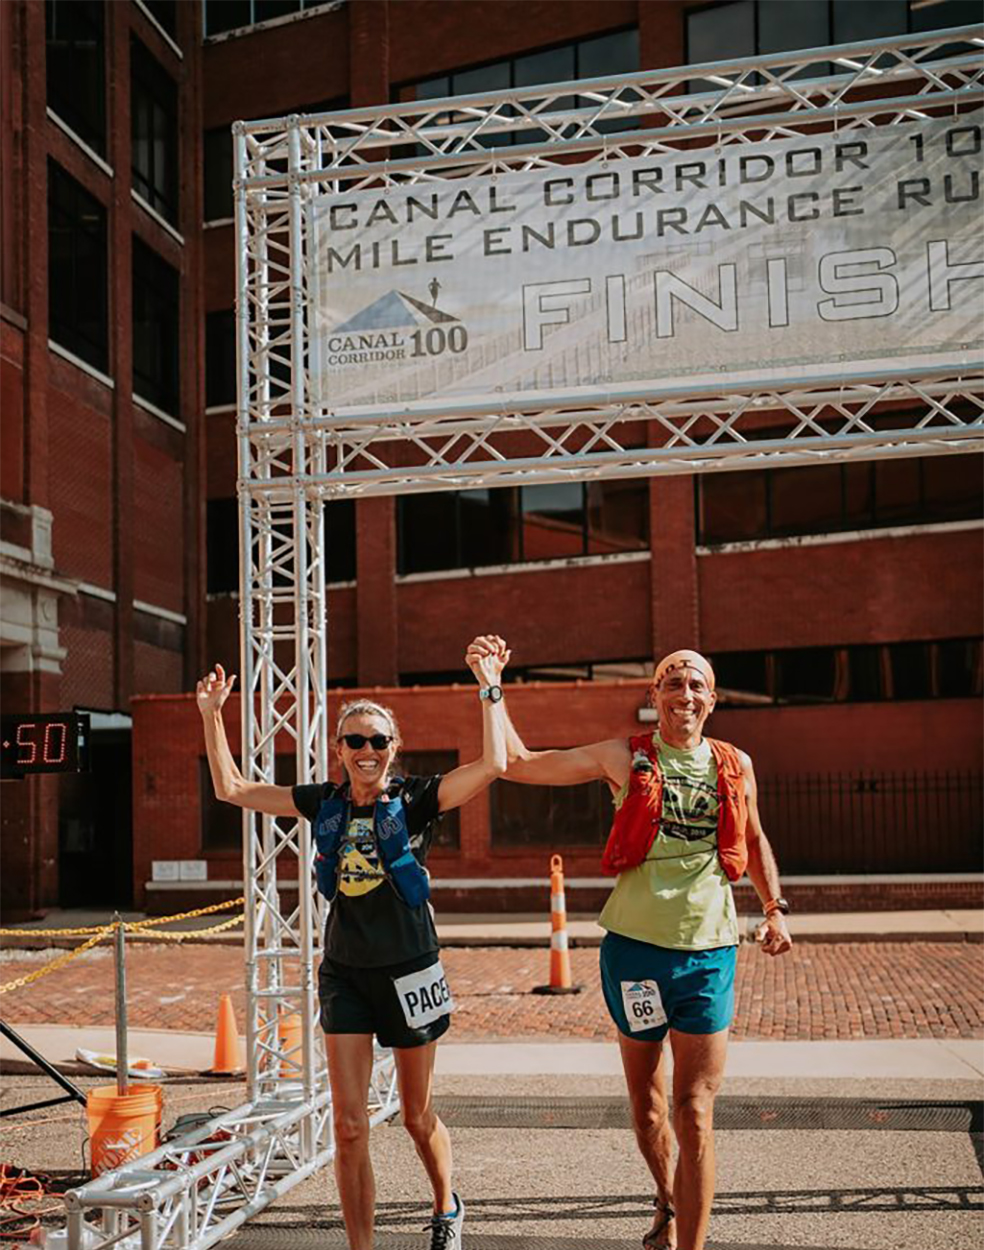 Randy Kreill changed his lifestyle drastically after a cancer diagnosis. That included long distance running, which he does in minimalist footwear. He is shown with his wife Megan, crossing the finish line at the Canal Corridor 100 mile race in July of 2020. CONTRIBUTED